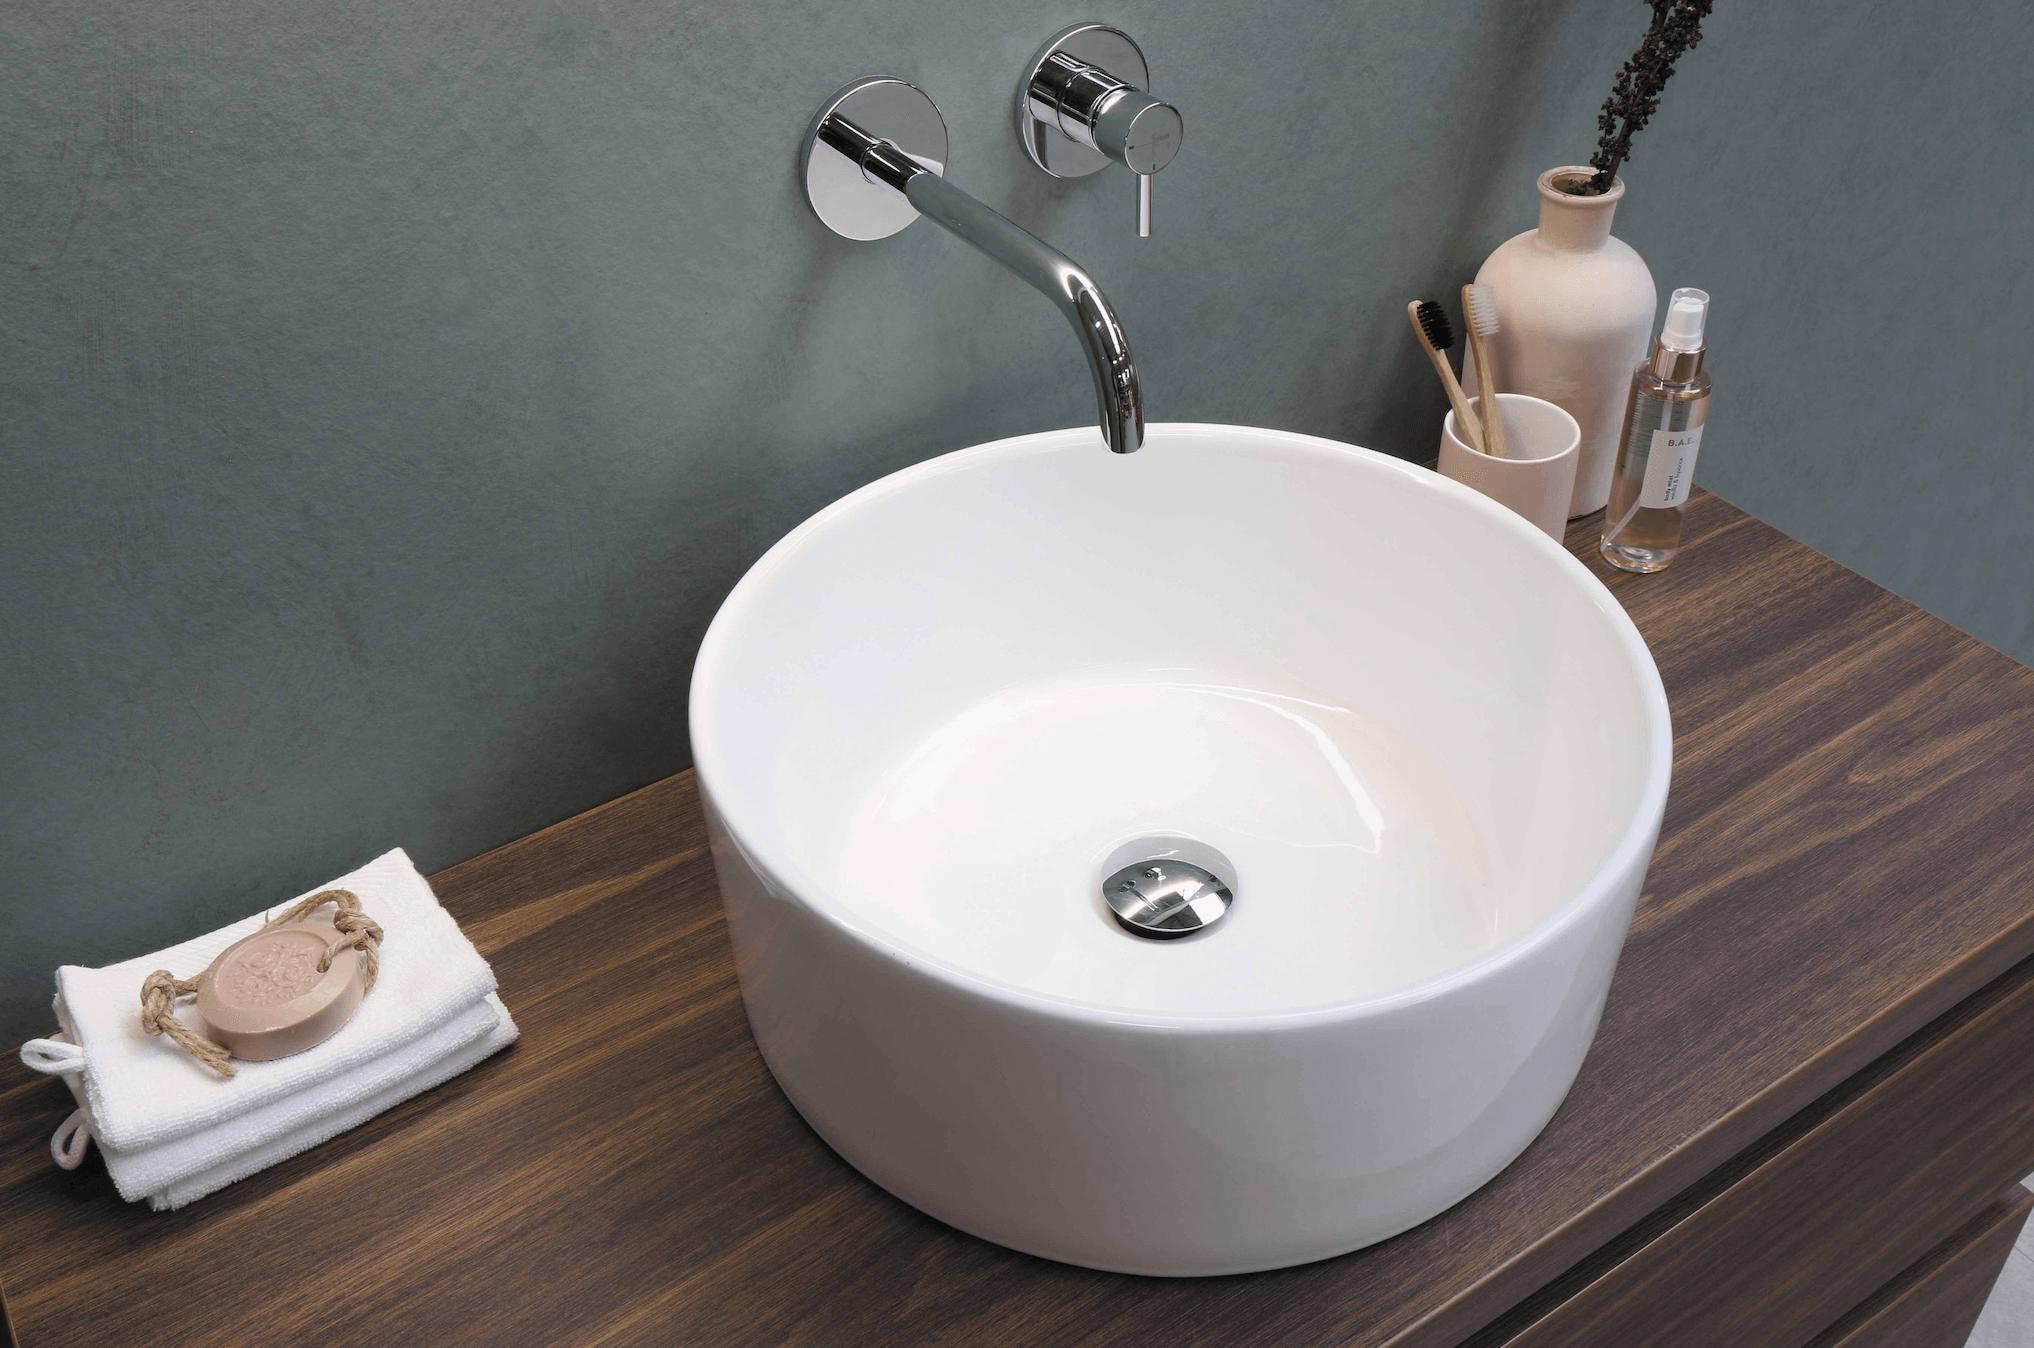 Choosing The Right Faucets And Finishes For Your Bathroom - Bathroom Design Center